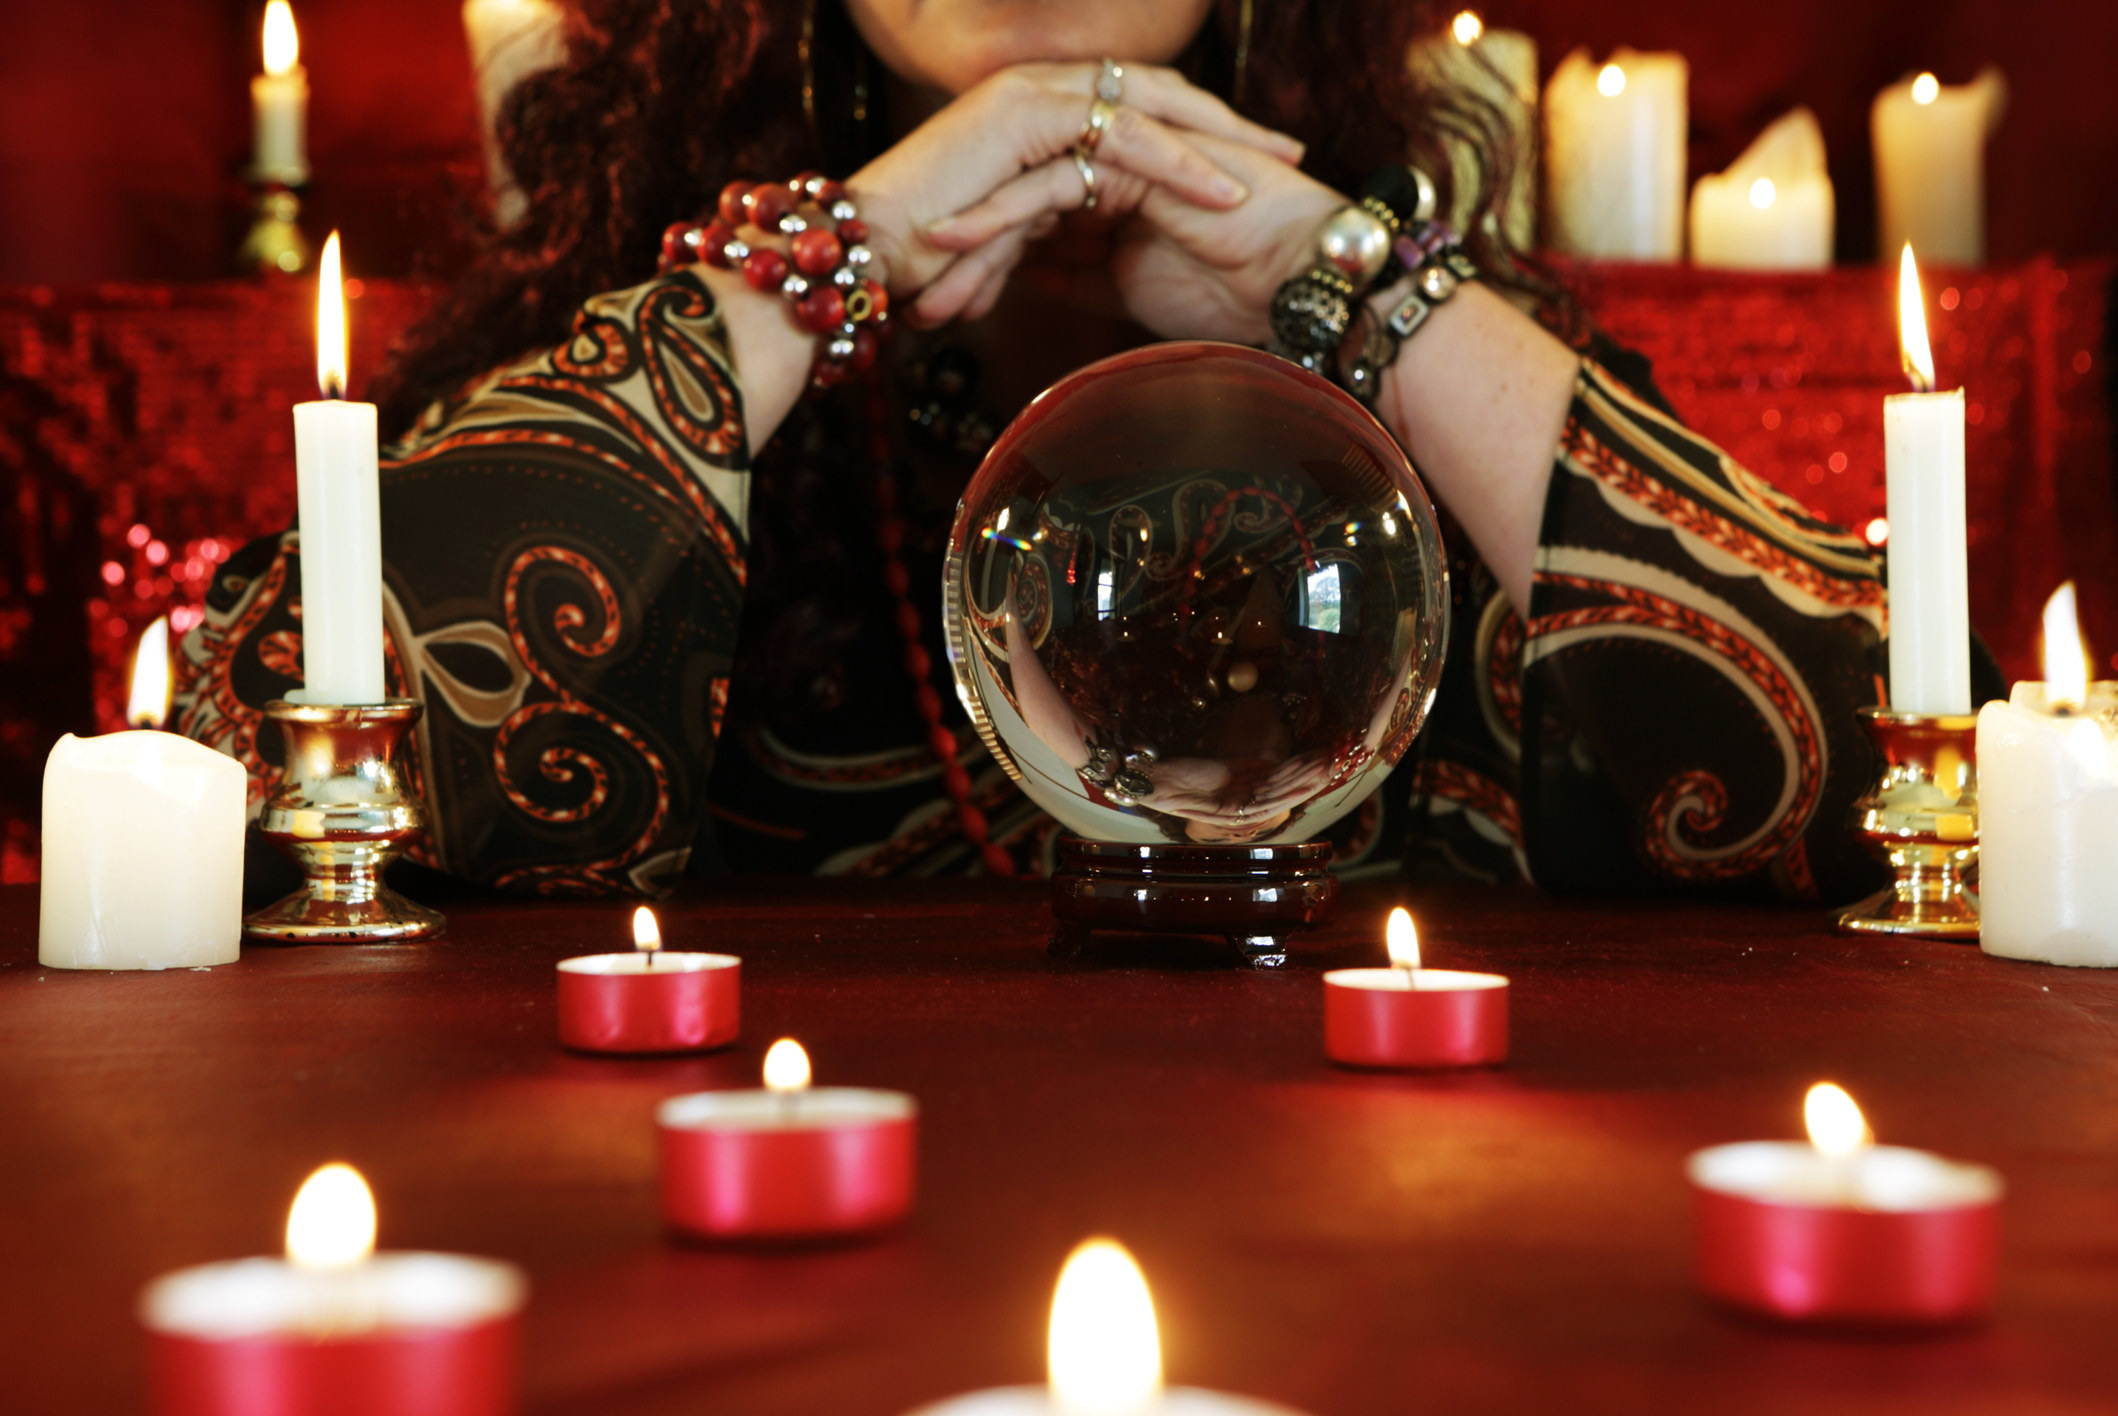 A fortune teller with a crystal ball